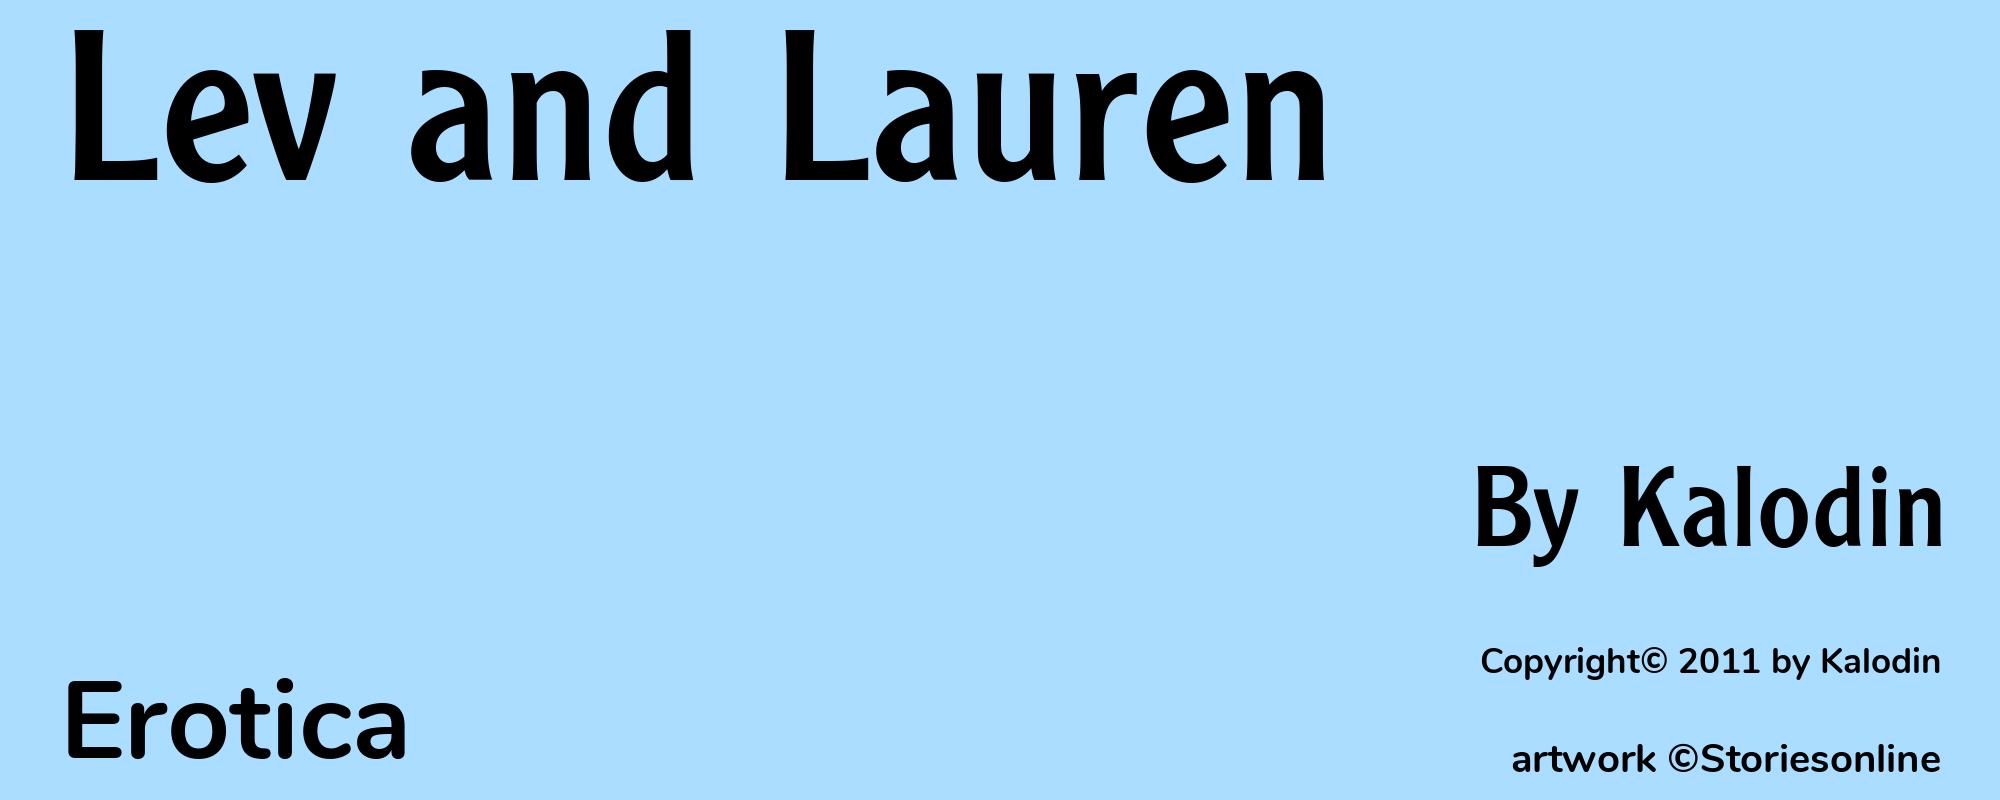 Lev and Lauren - Cover